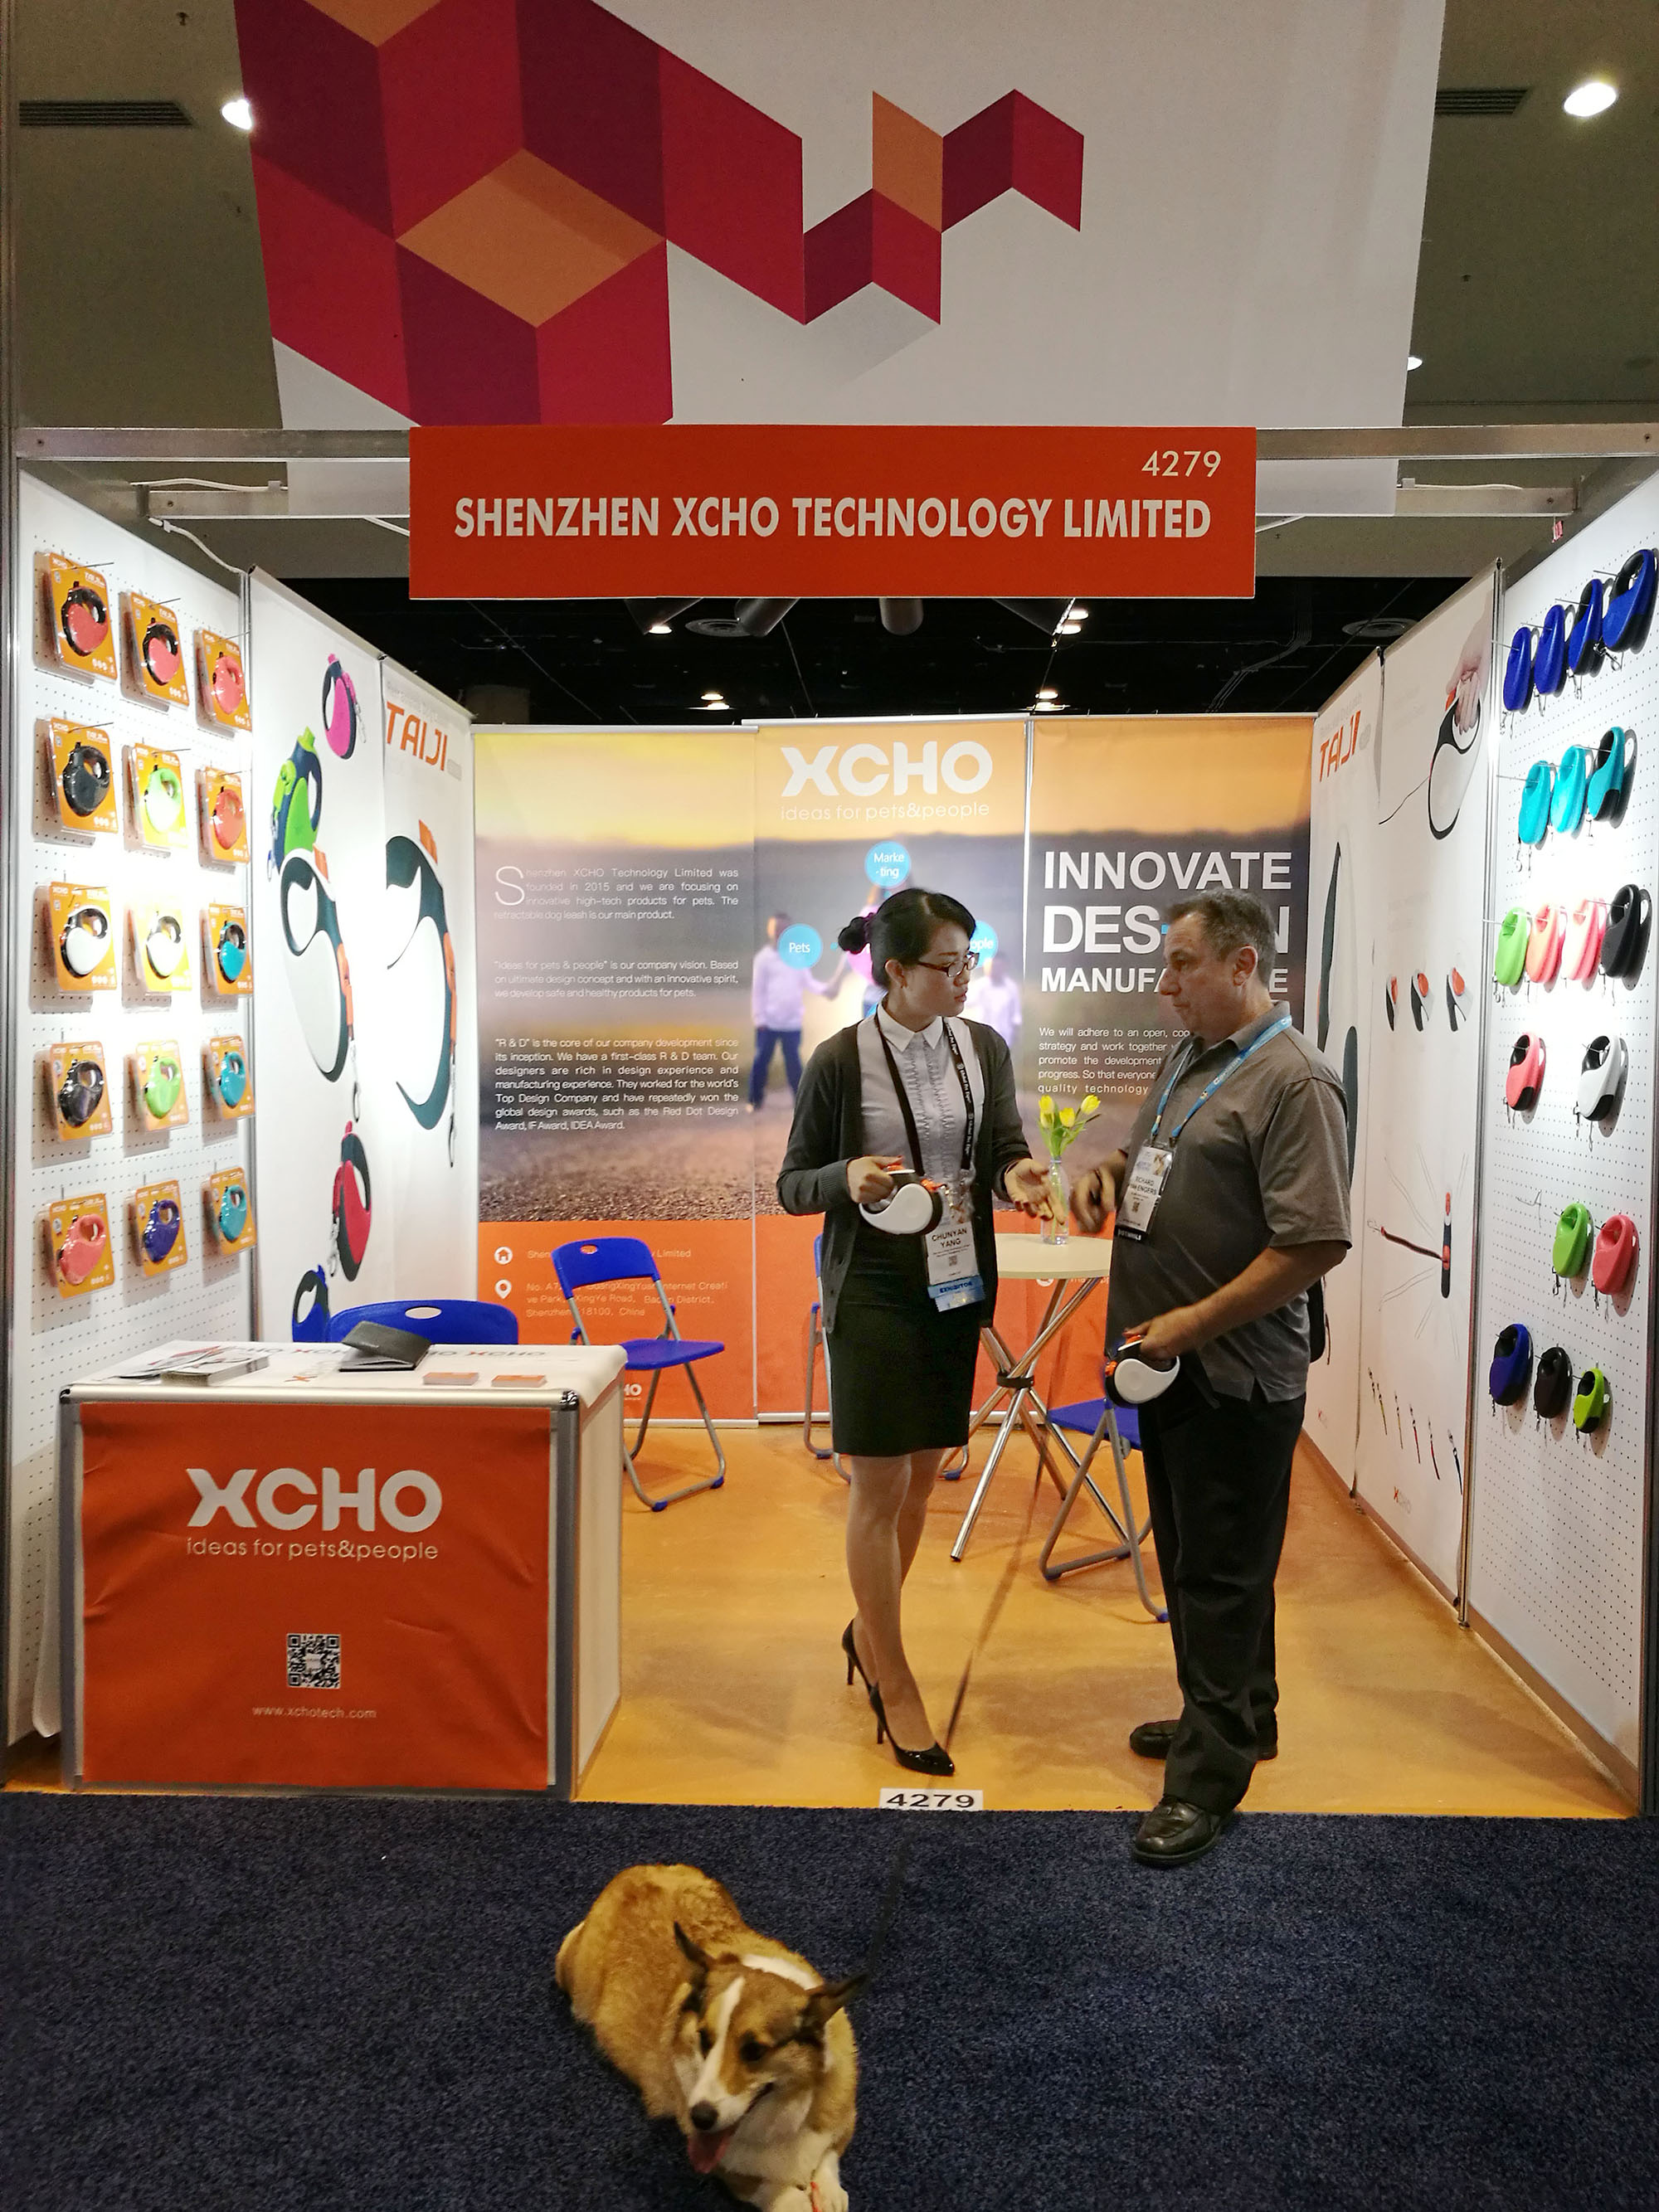 XCHO 2017 Global Pet Expo Exhibition in Orlando, USA from March 22 to 24, Booth #4279.